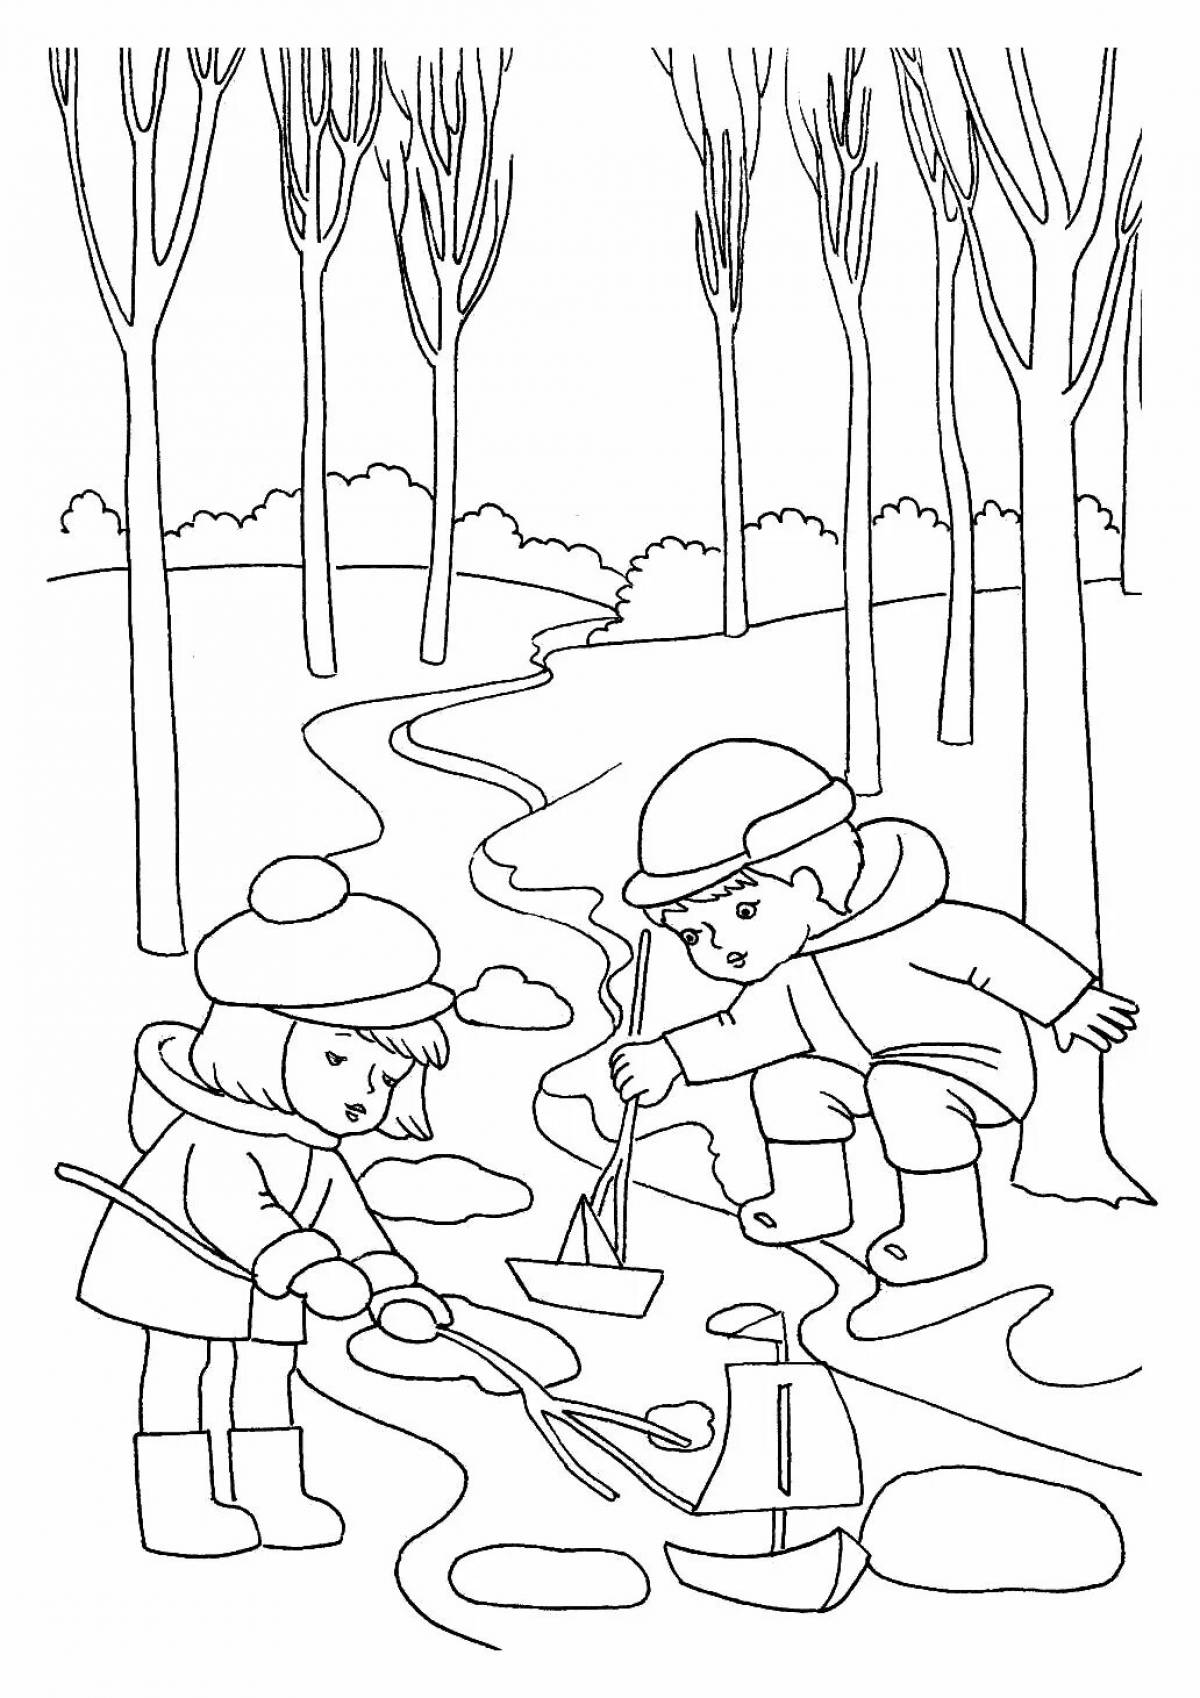 Spring is coming coloring page